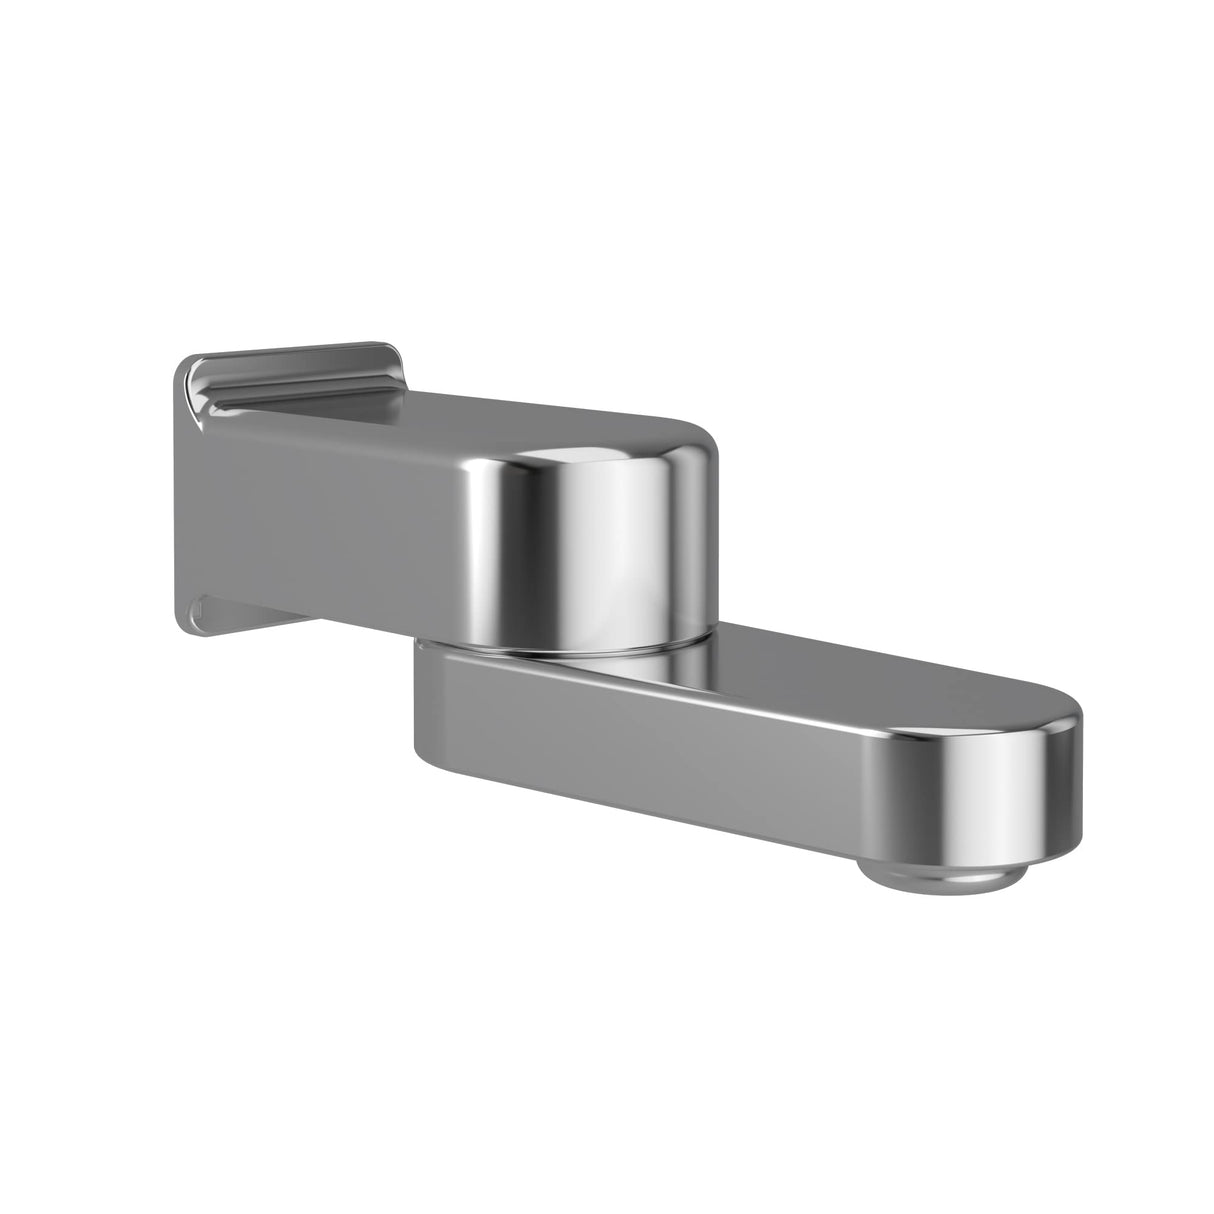 PULSE ShowerSpas 3011-TS-CH Fold Away Tub Spout and Diverter, 1/2" NPT Connection, Polished Chrome